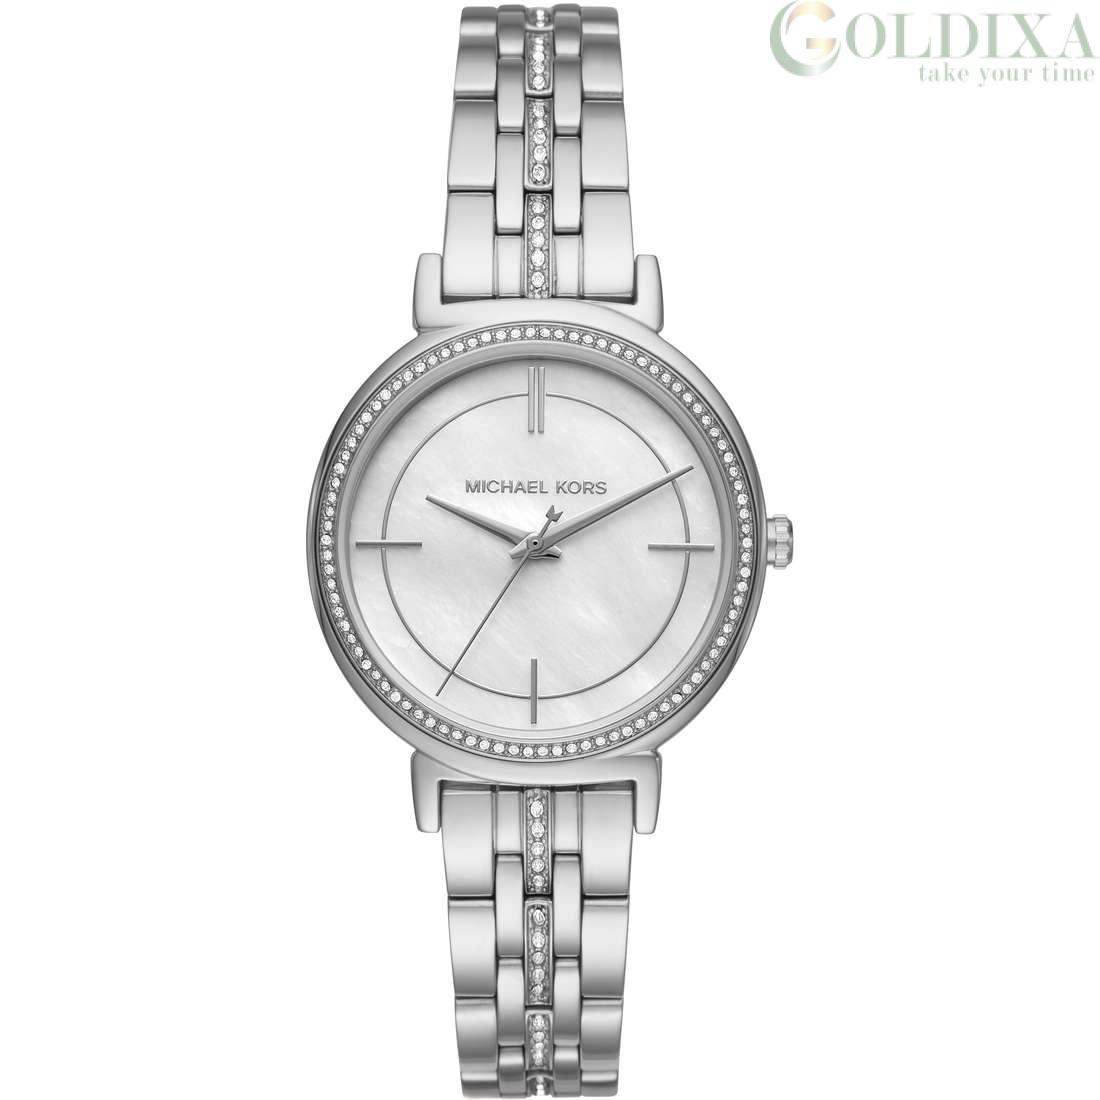 Watches: Watch Michael Kors woman only 